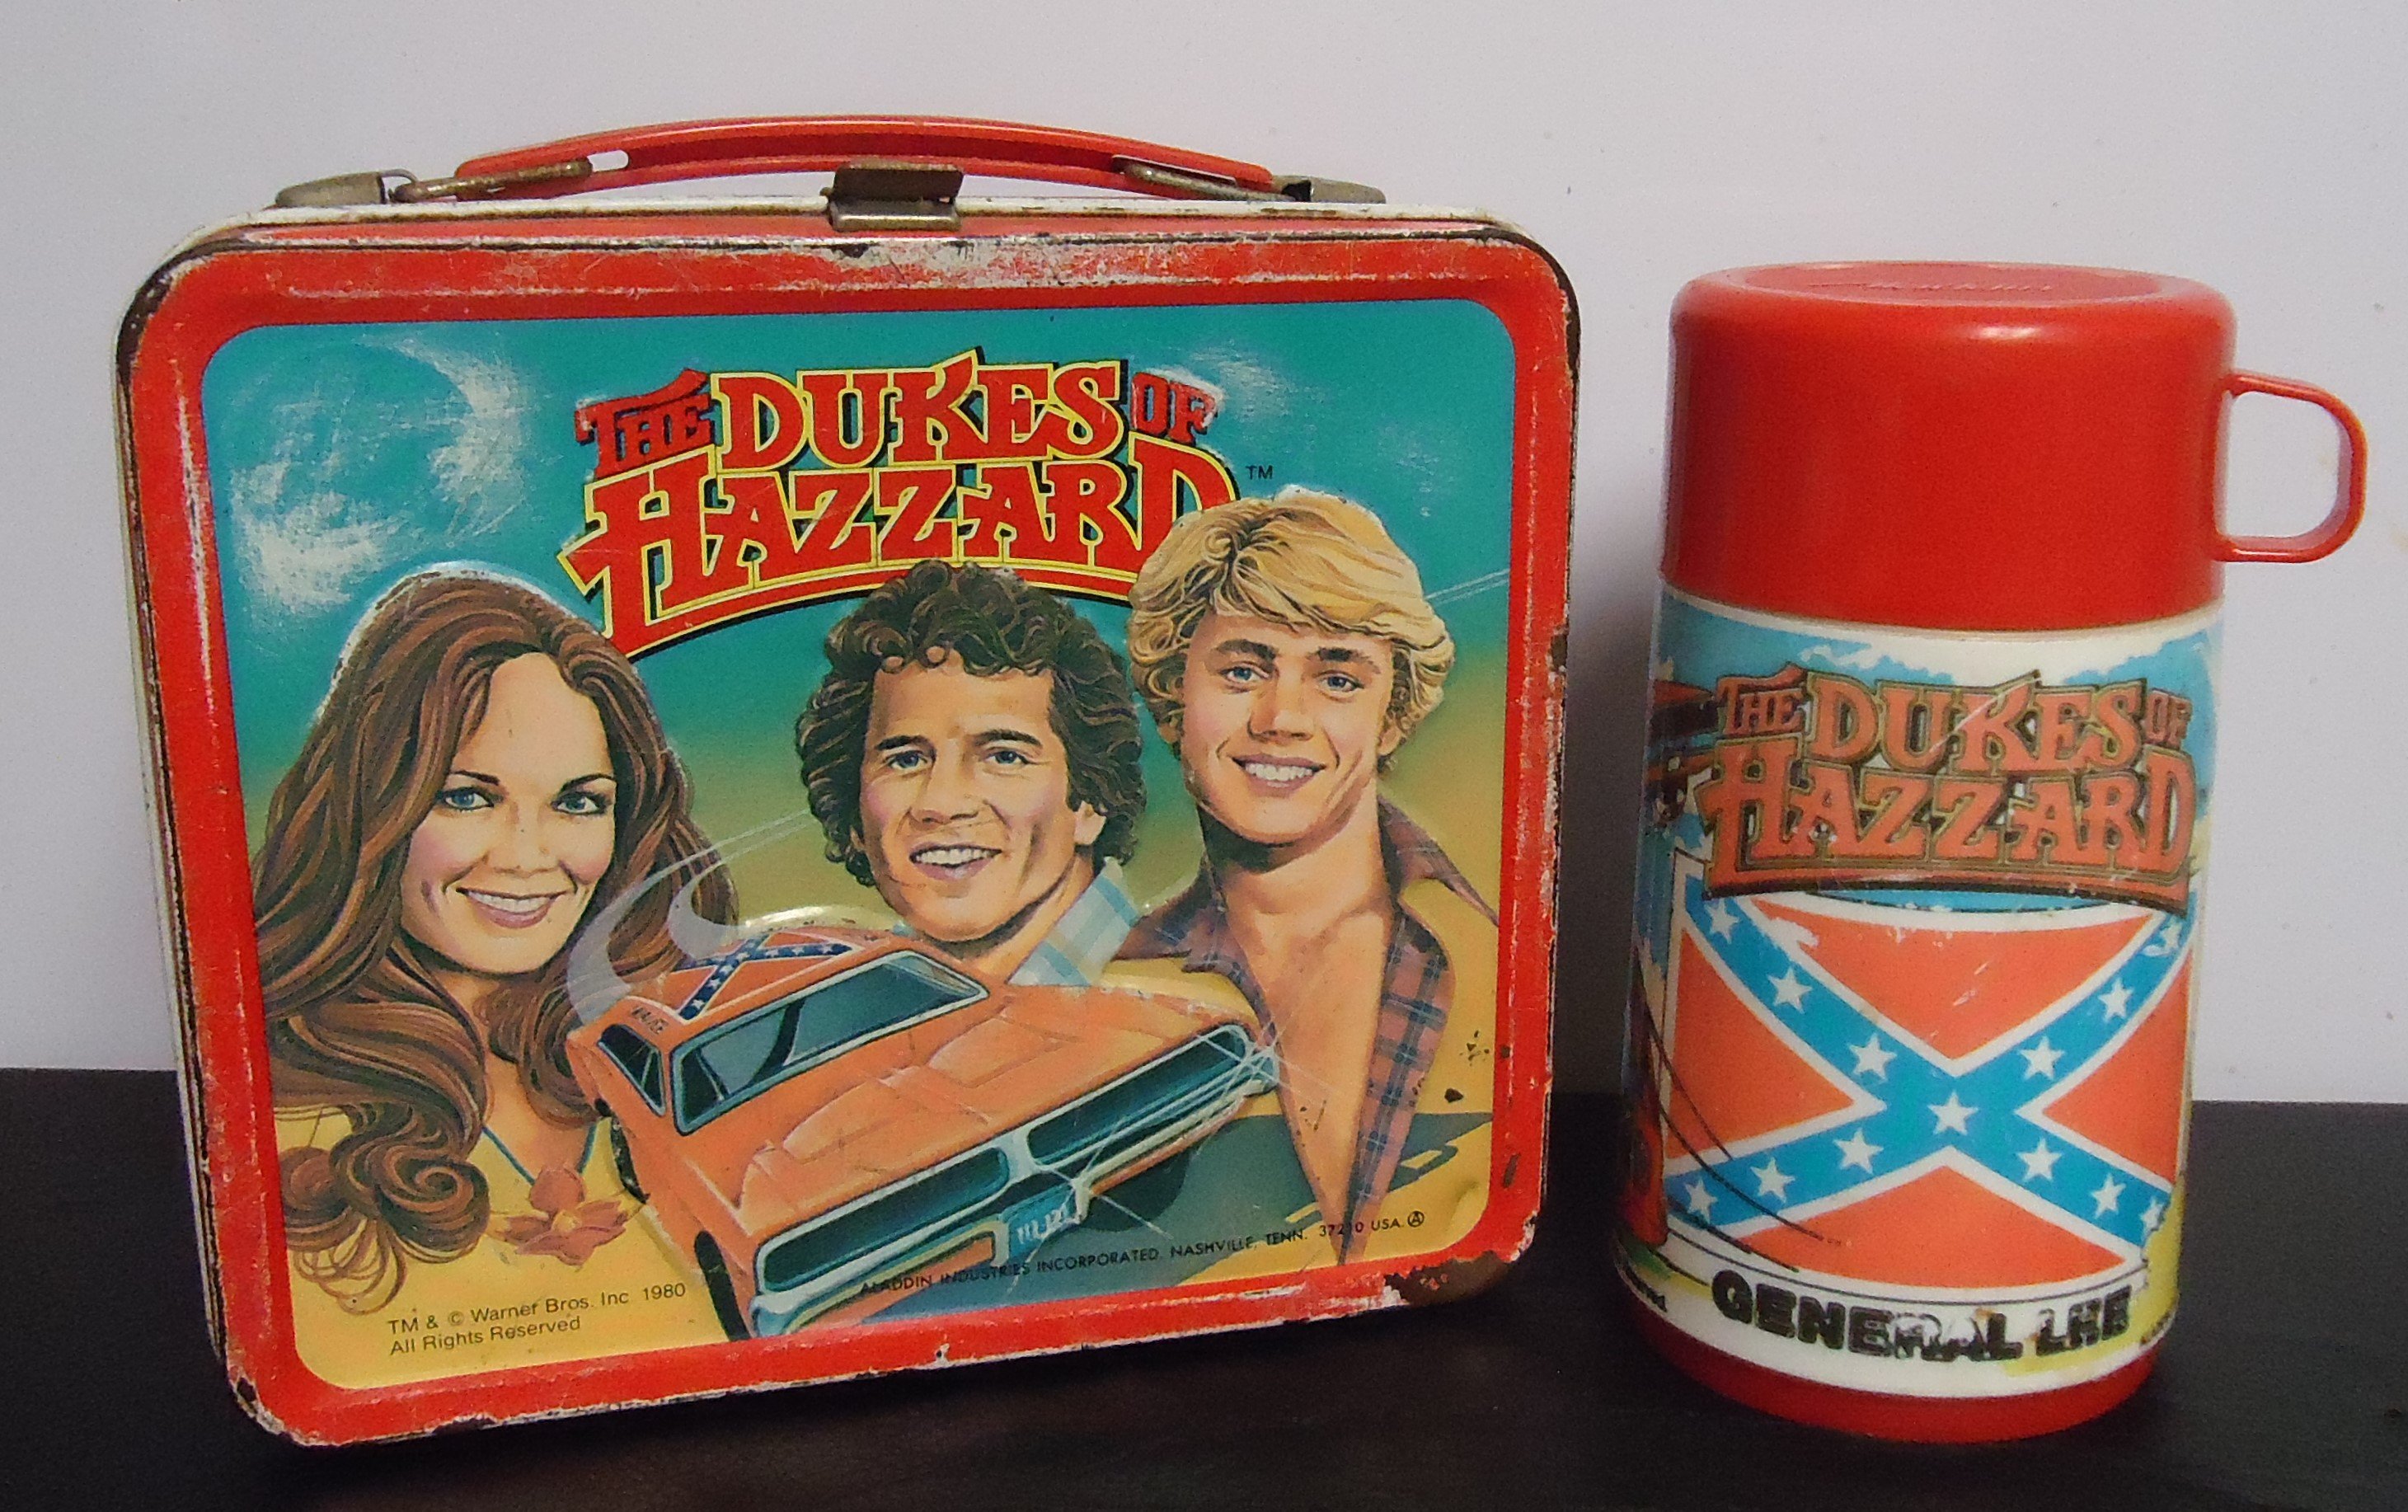 ( SOLD!!! )
(3) Metal Lunch Box W/Thermos
"The Dukes Of Hazzard"
$88.00